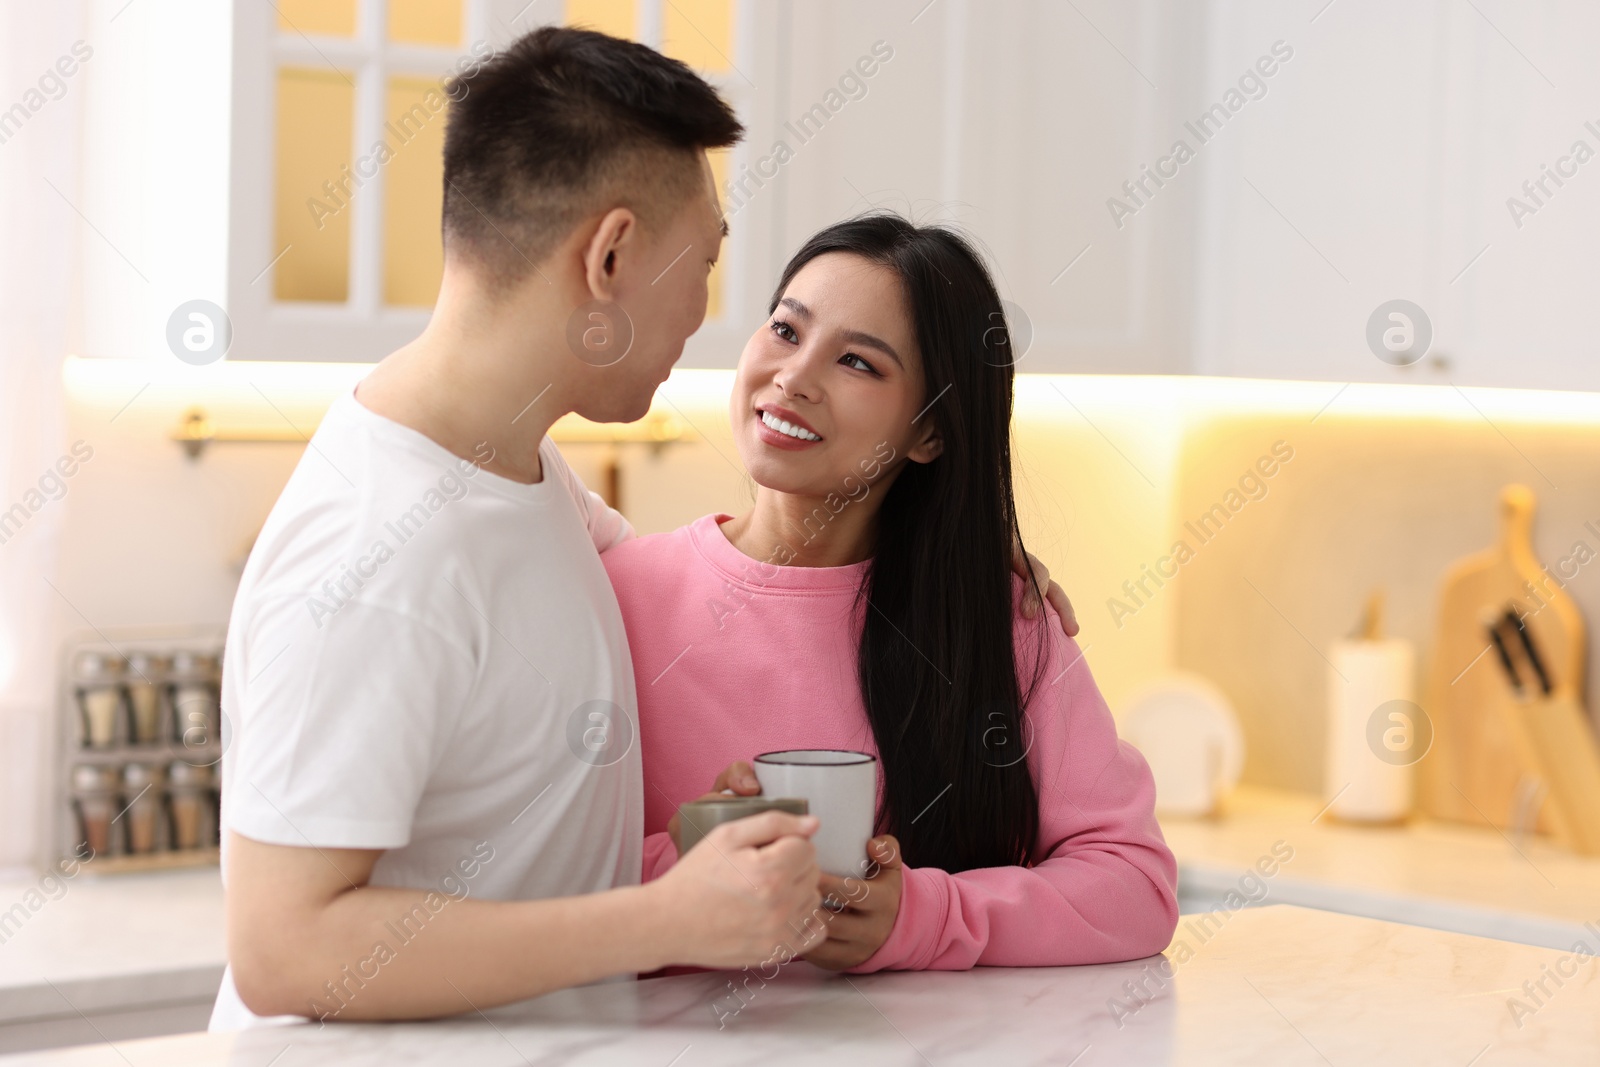 Photo of Lovely couple with cups of drink enjoying time together in kitchen, space for text